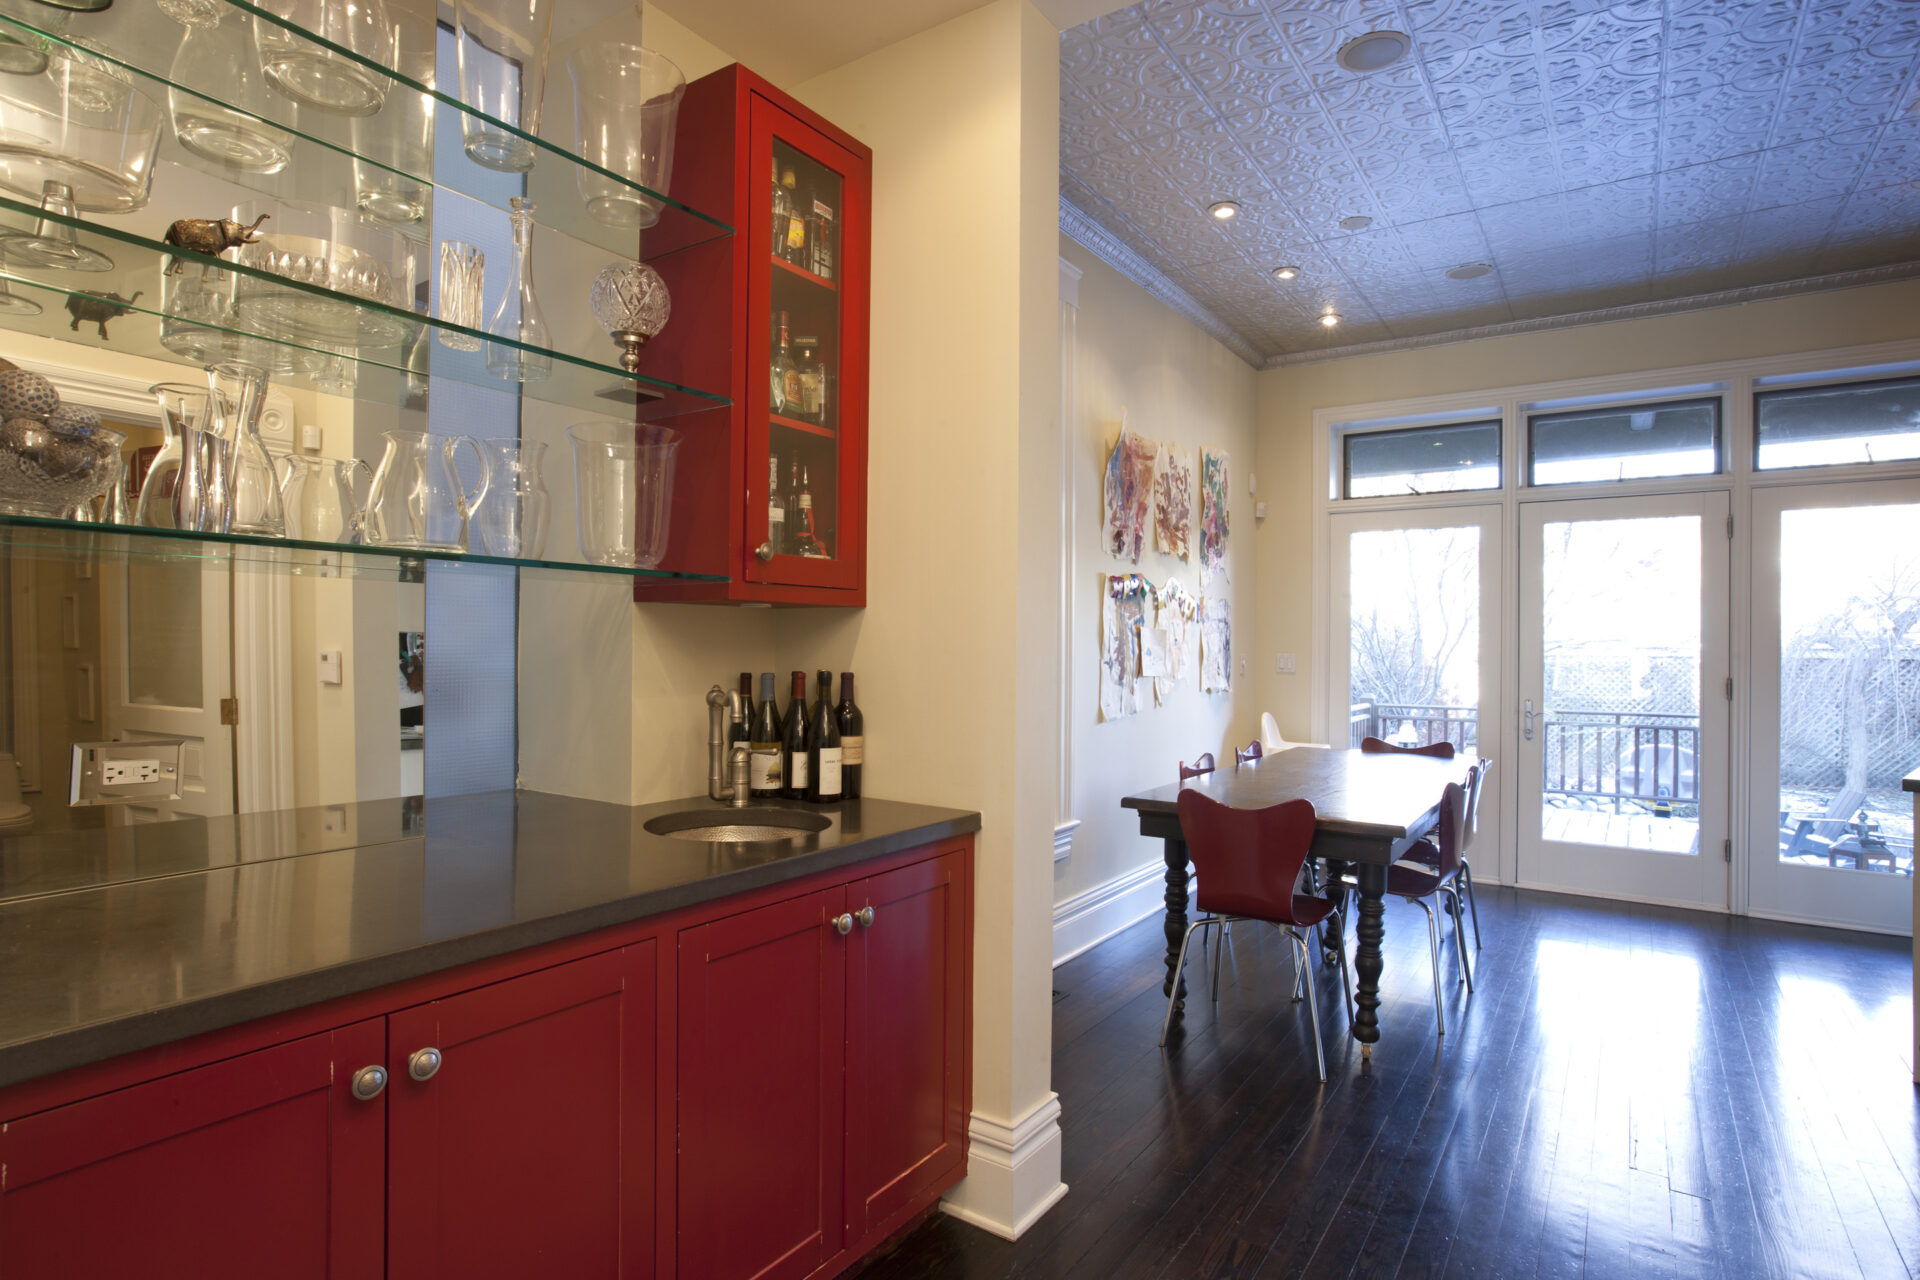 contemporary kitchen space with accent tiles, art, and furnishings